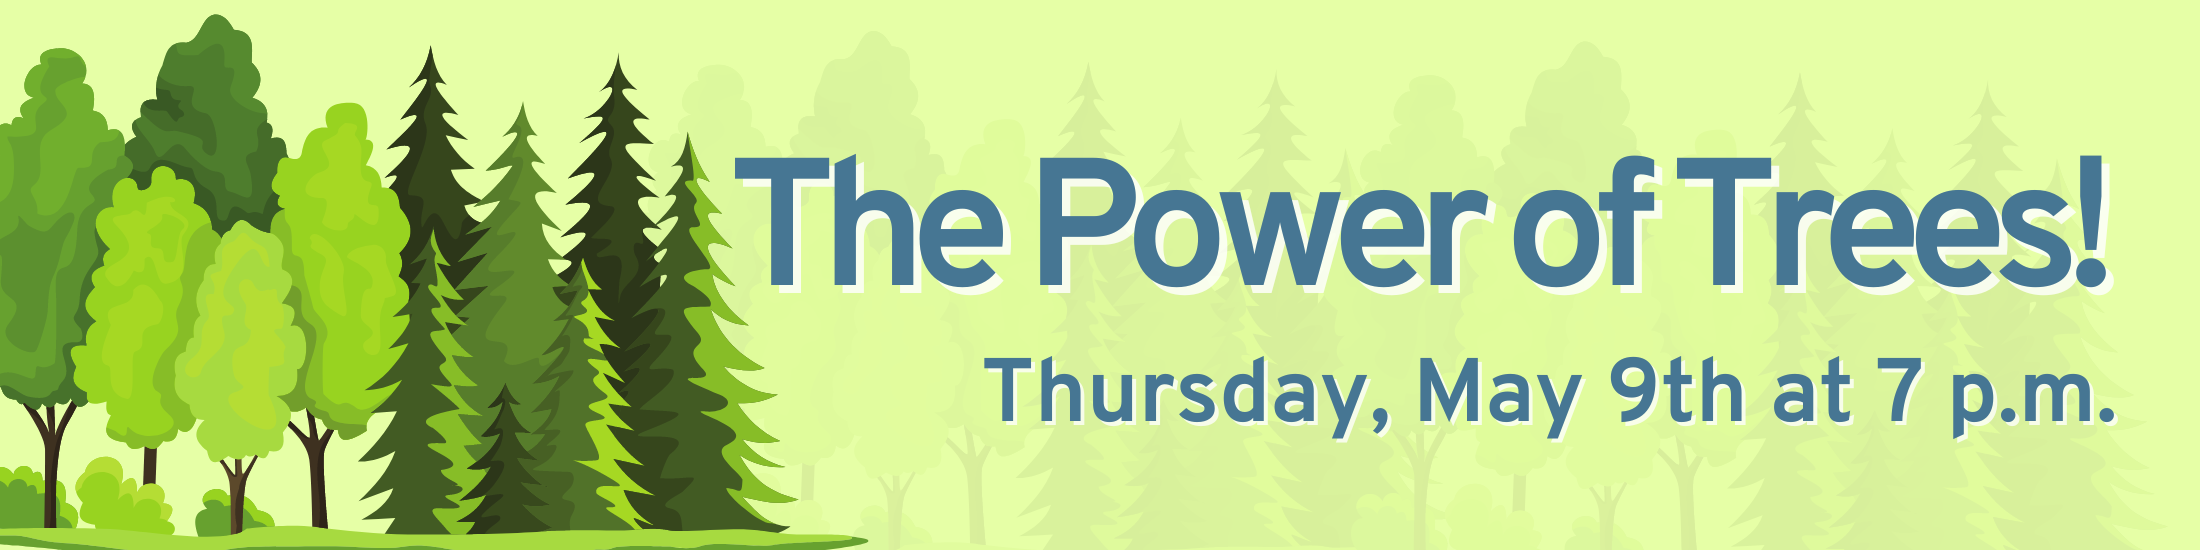 The Power of Trees! Thursday, May 9th at 7 p.m.